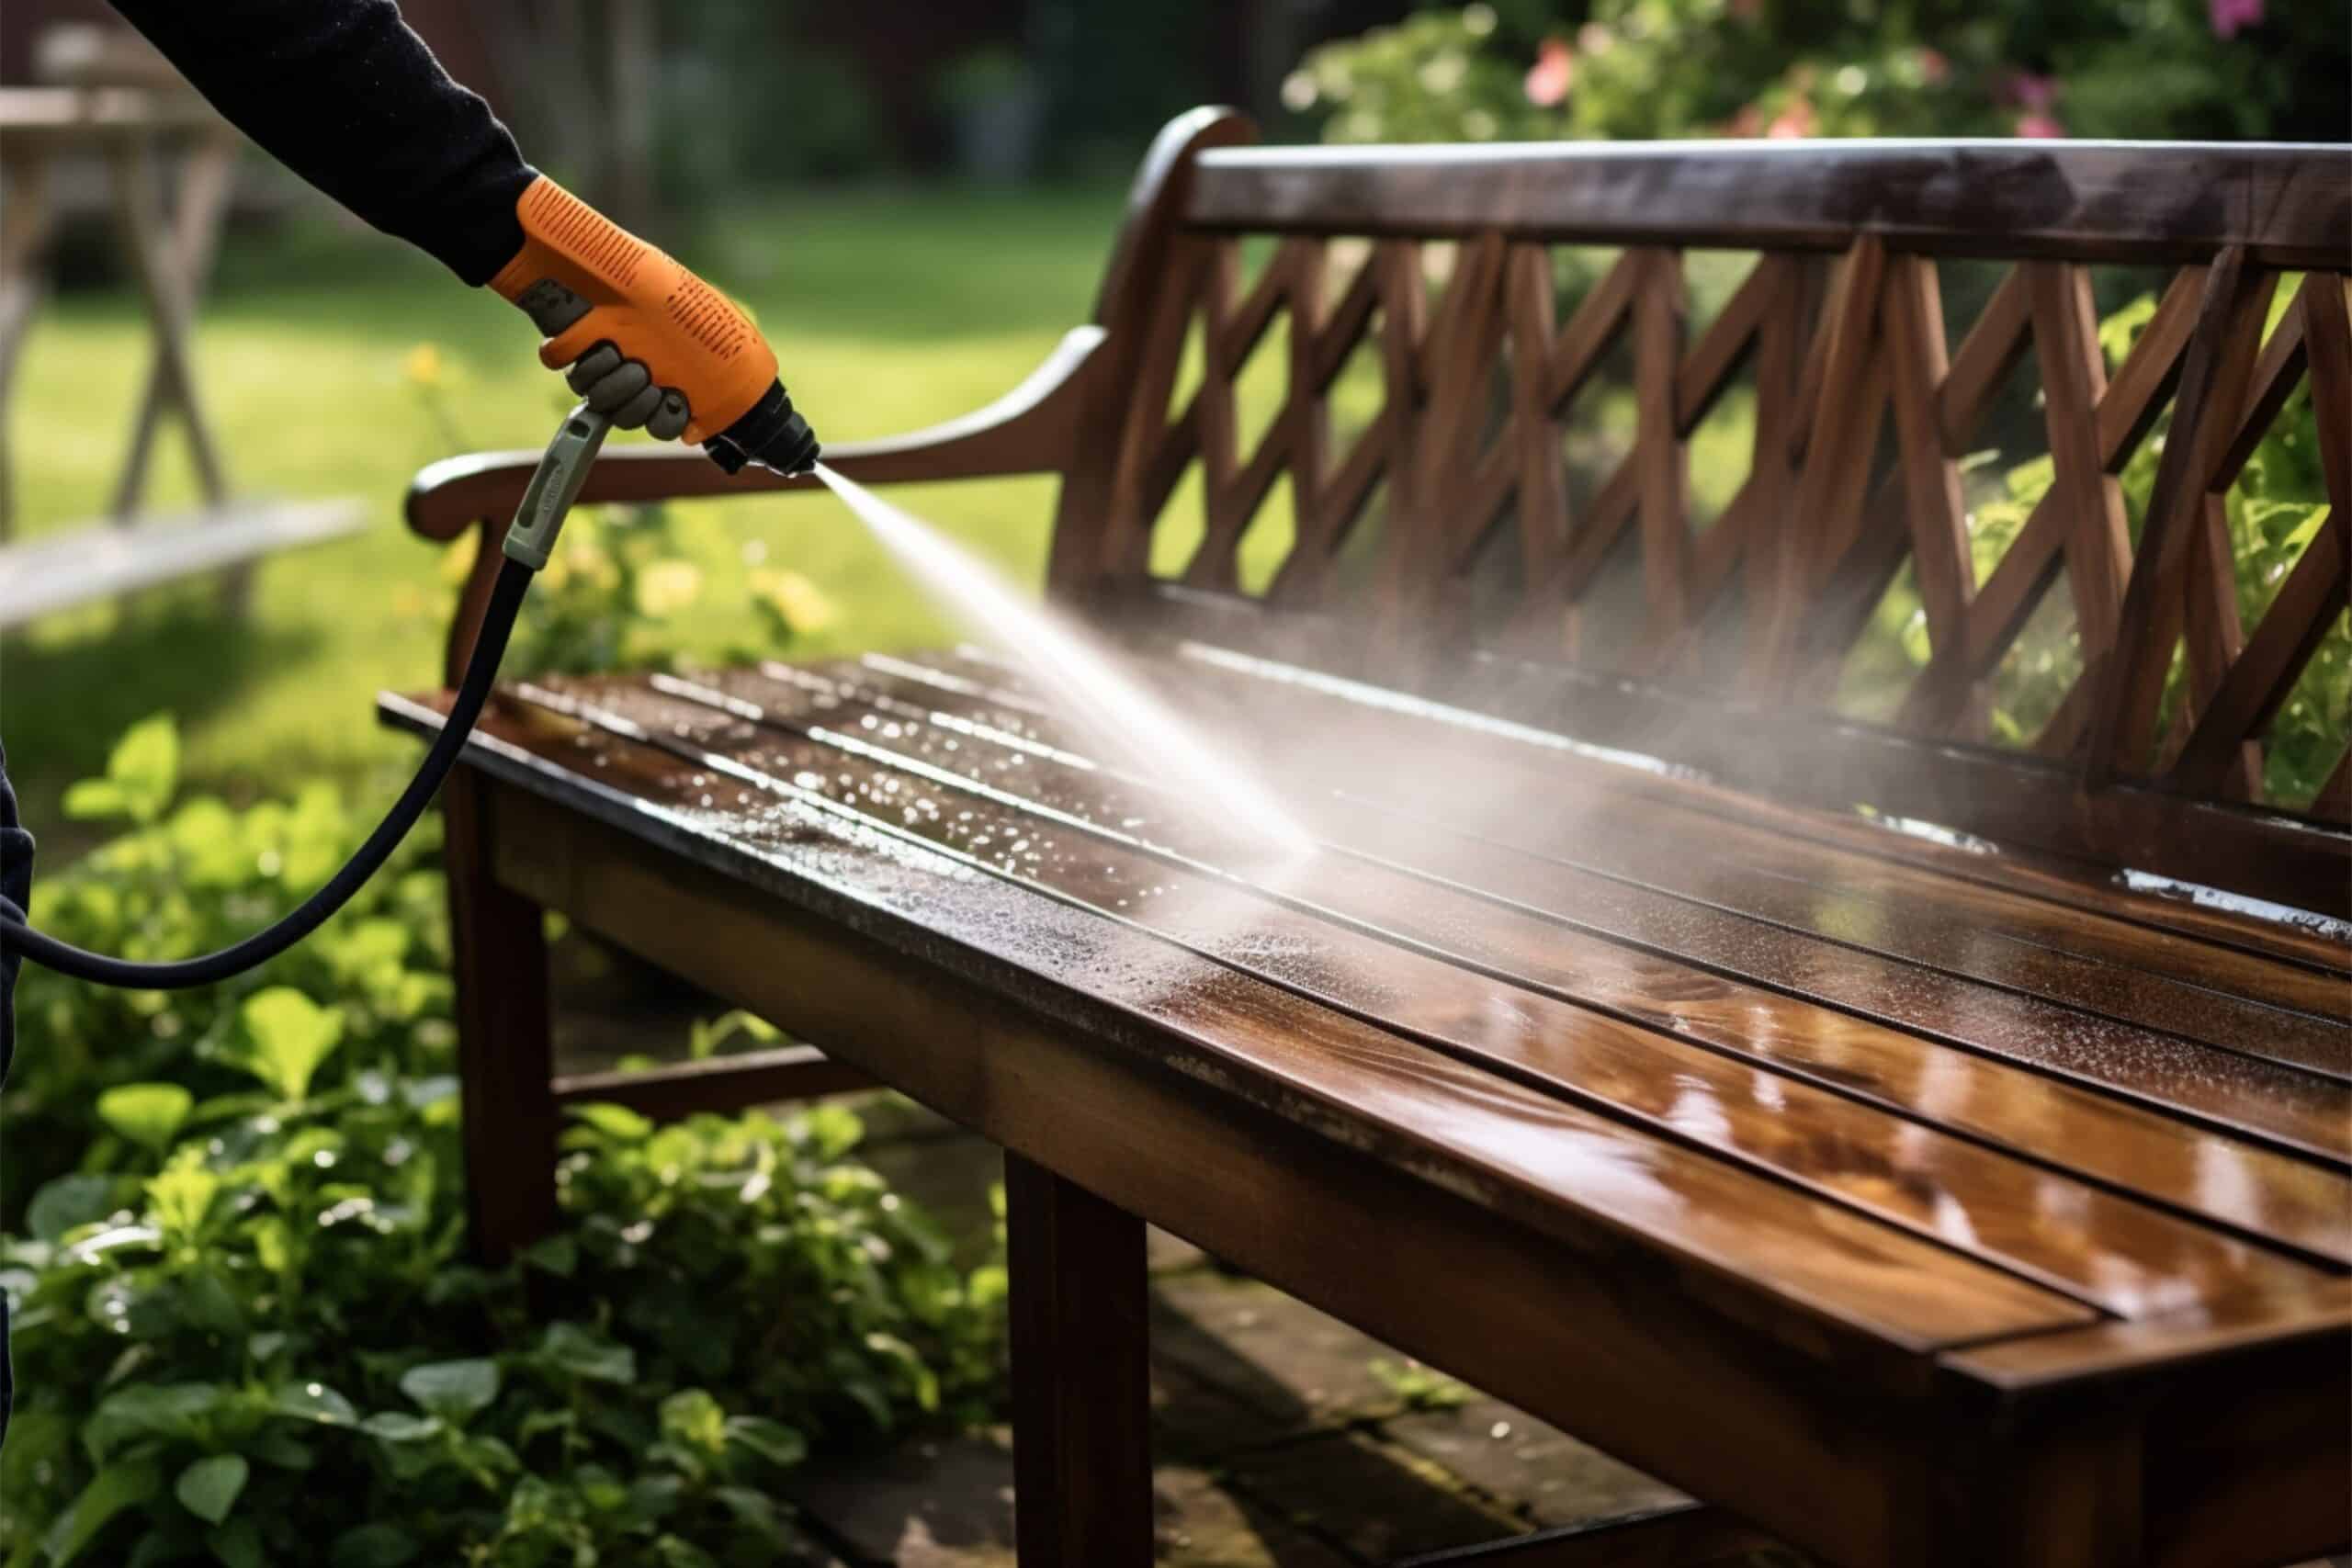 www.appr.com : Can I use bleach or other chemicals with my pressure washer?